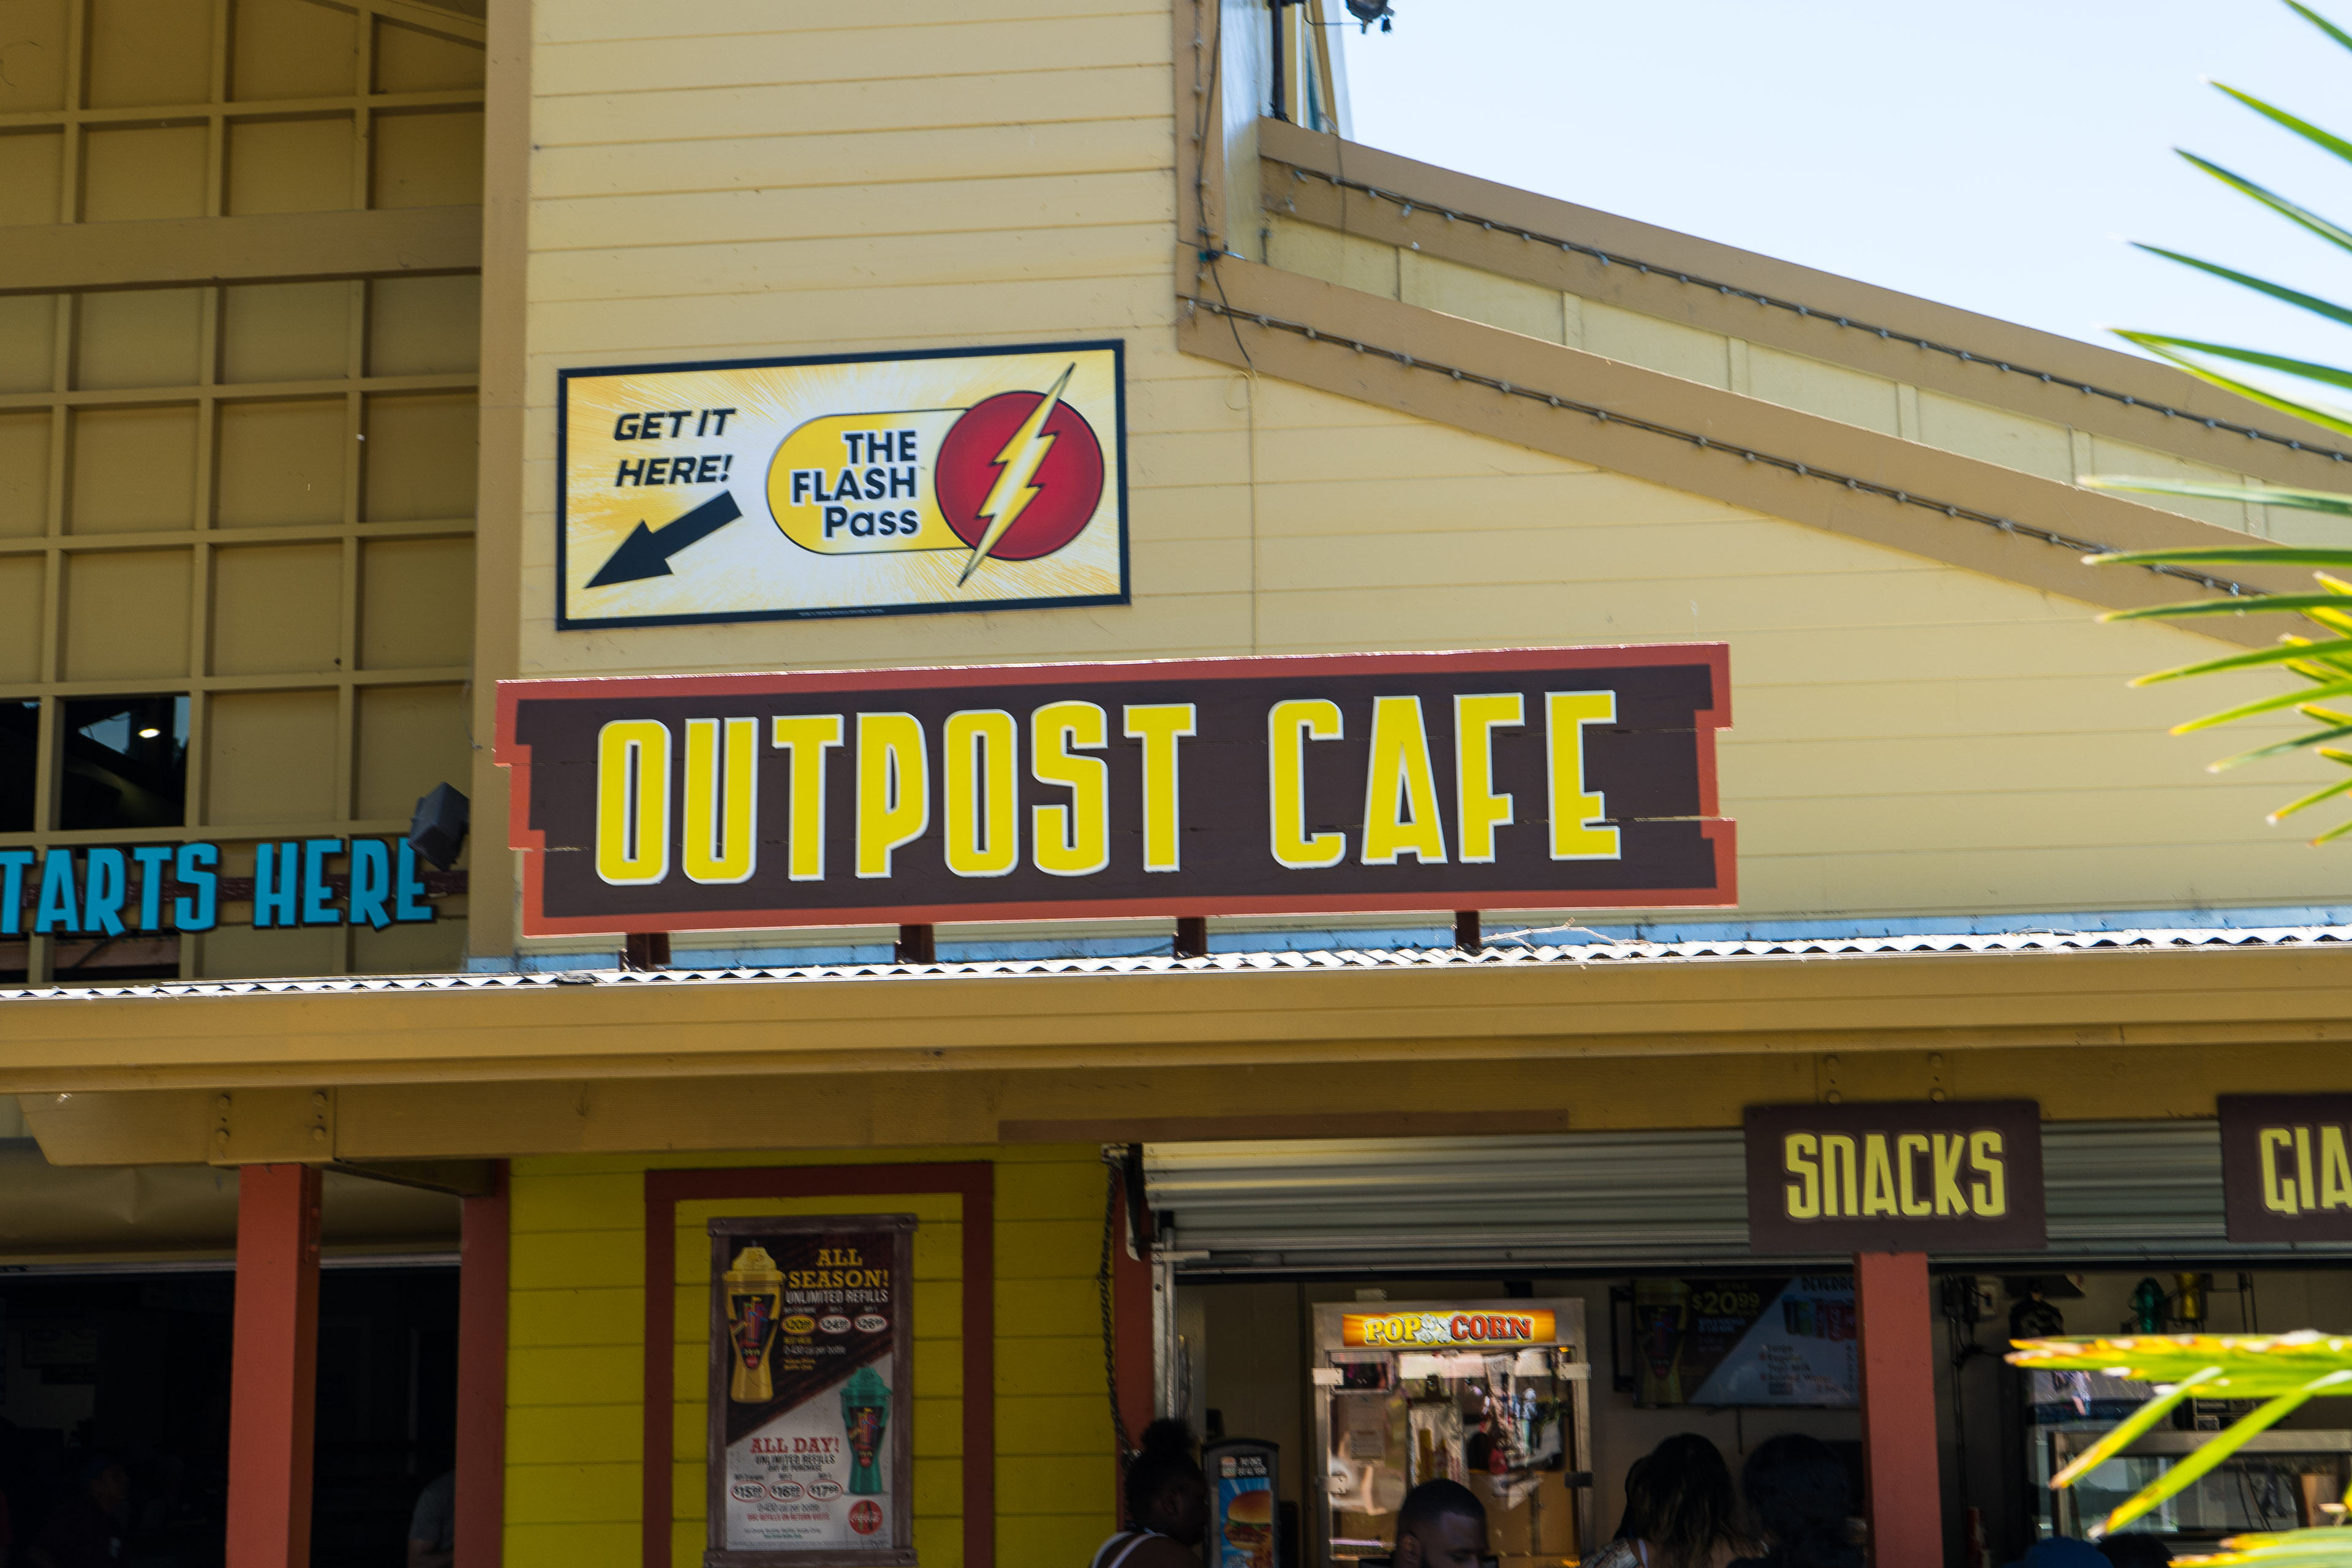 Outpost Cafe